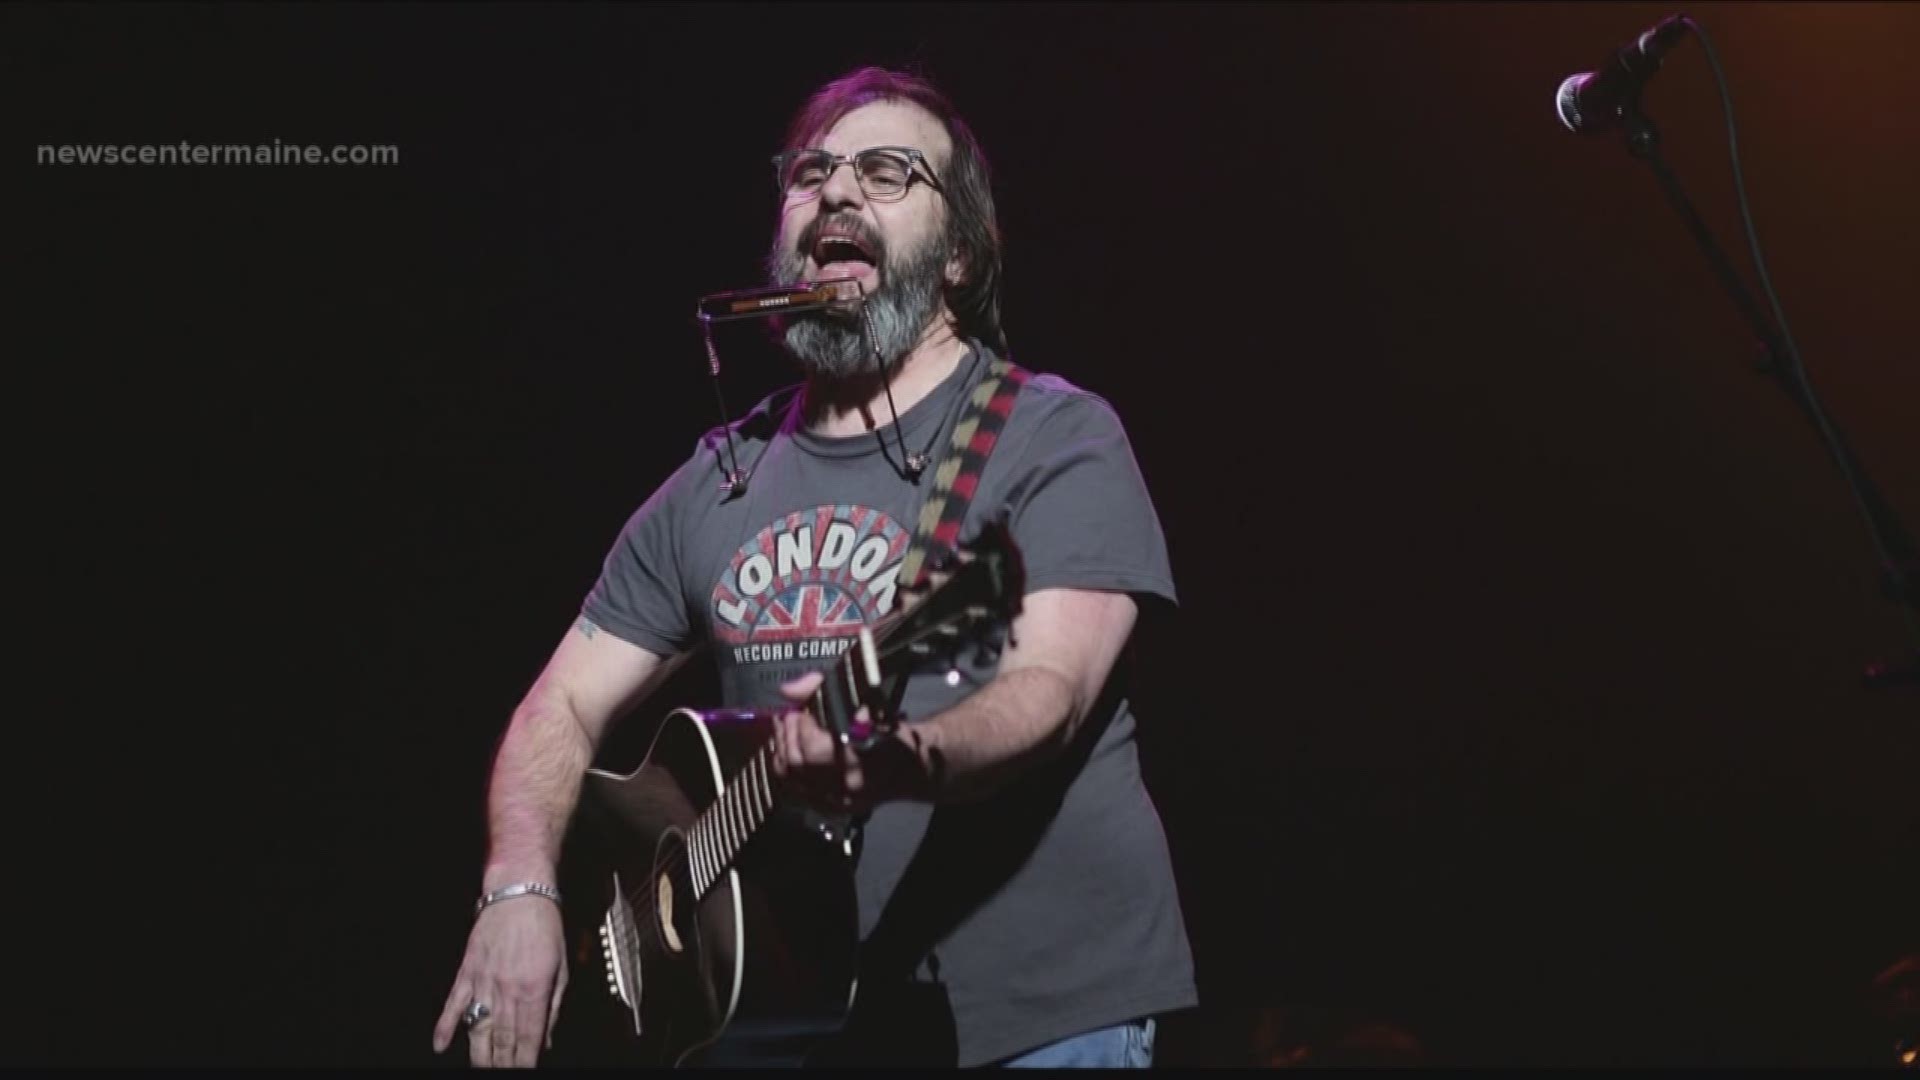 Imagine being ten years old and wildly excited about the prospect of going to see your first real concert. That was Steve Earle, growing up in Texas in 1965 and getting ready to go to the Houston Coliseum to see a band called...the Beatles.